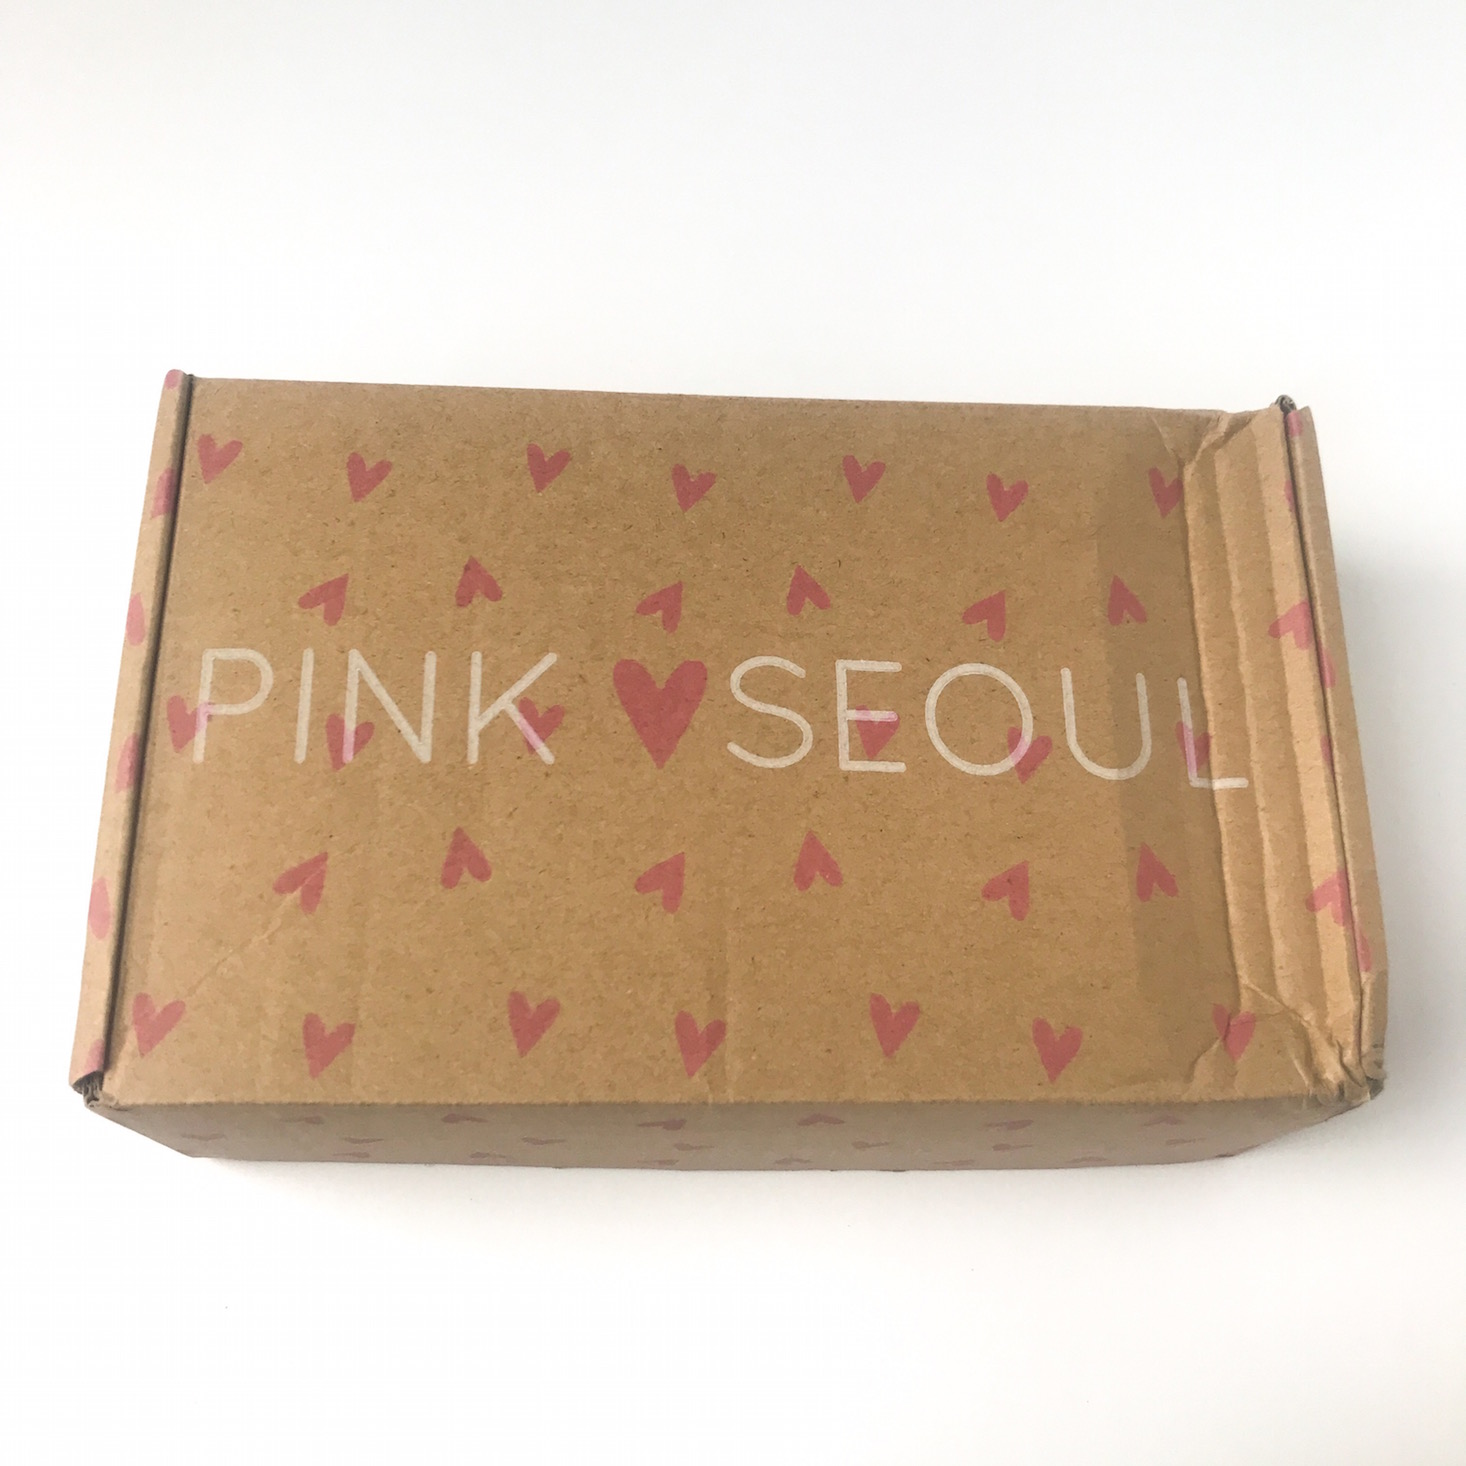 PinkSeoul Plus Box Review + Coupon – July/August 2018